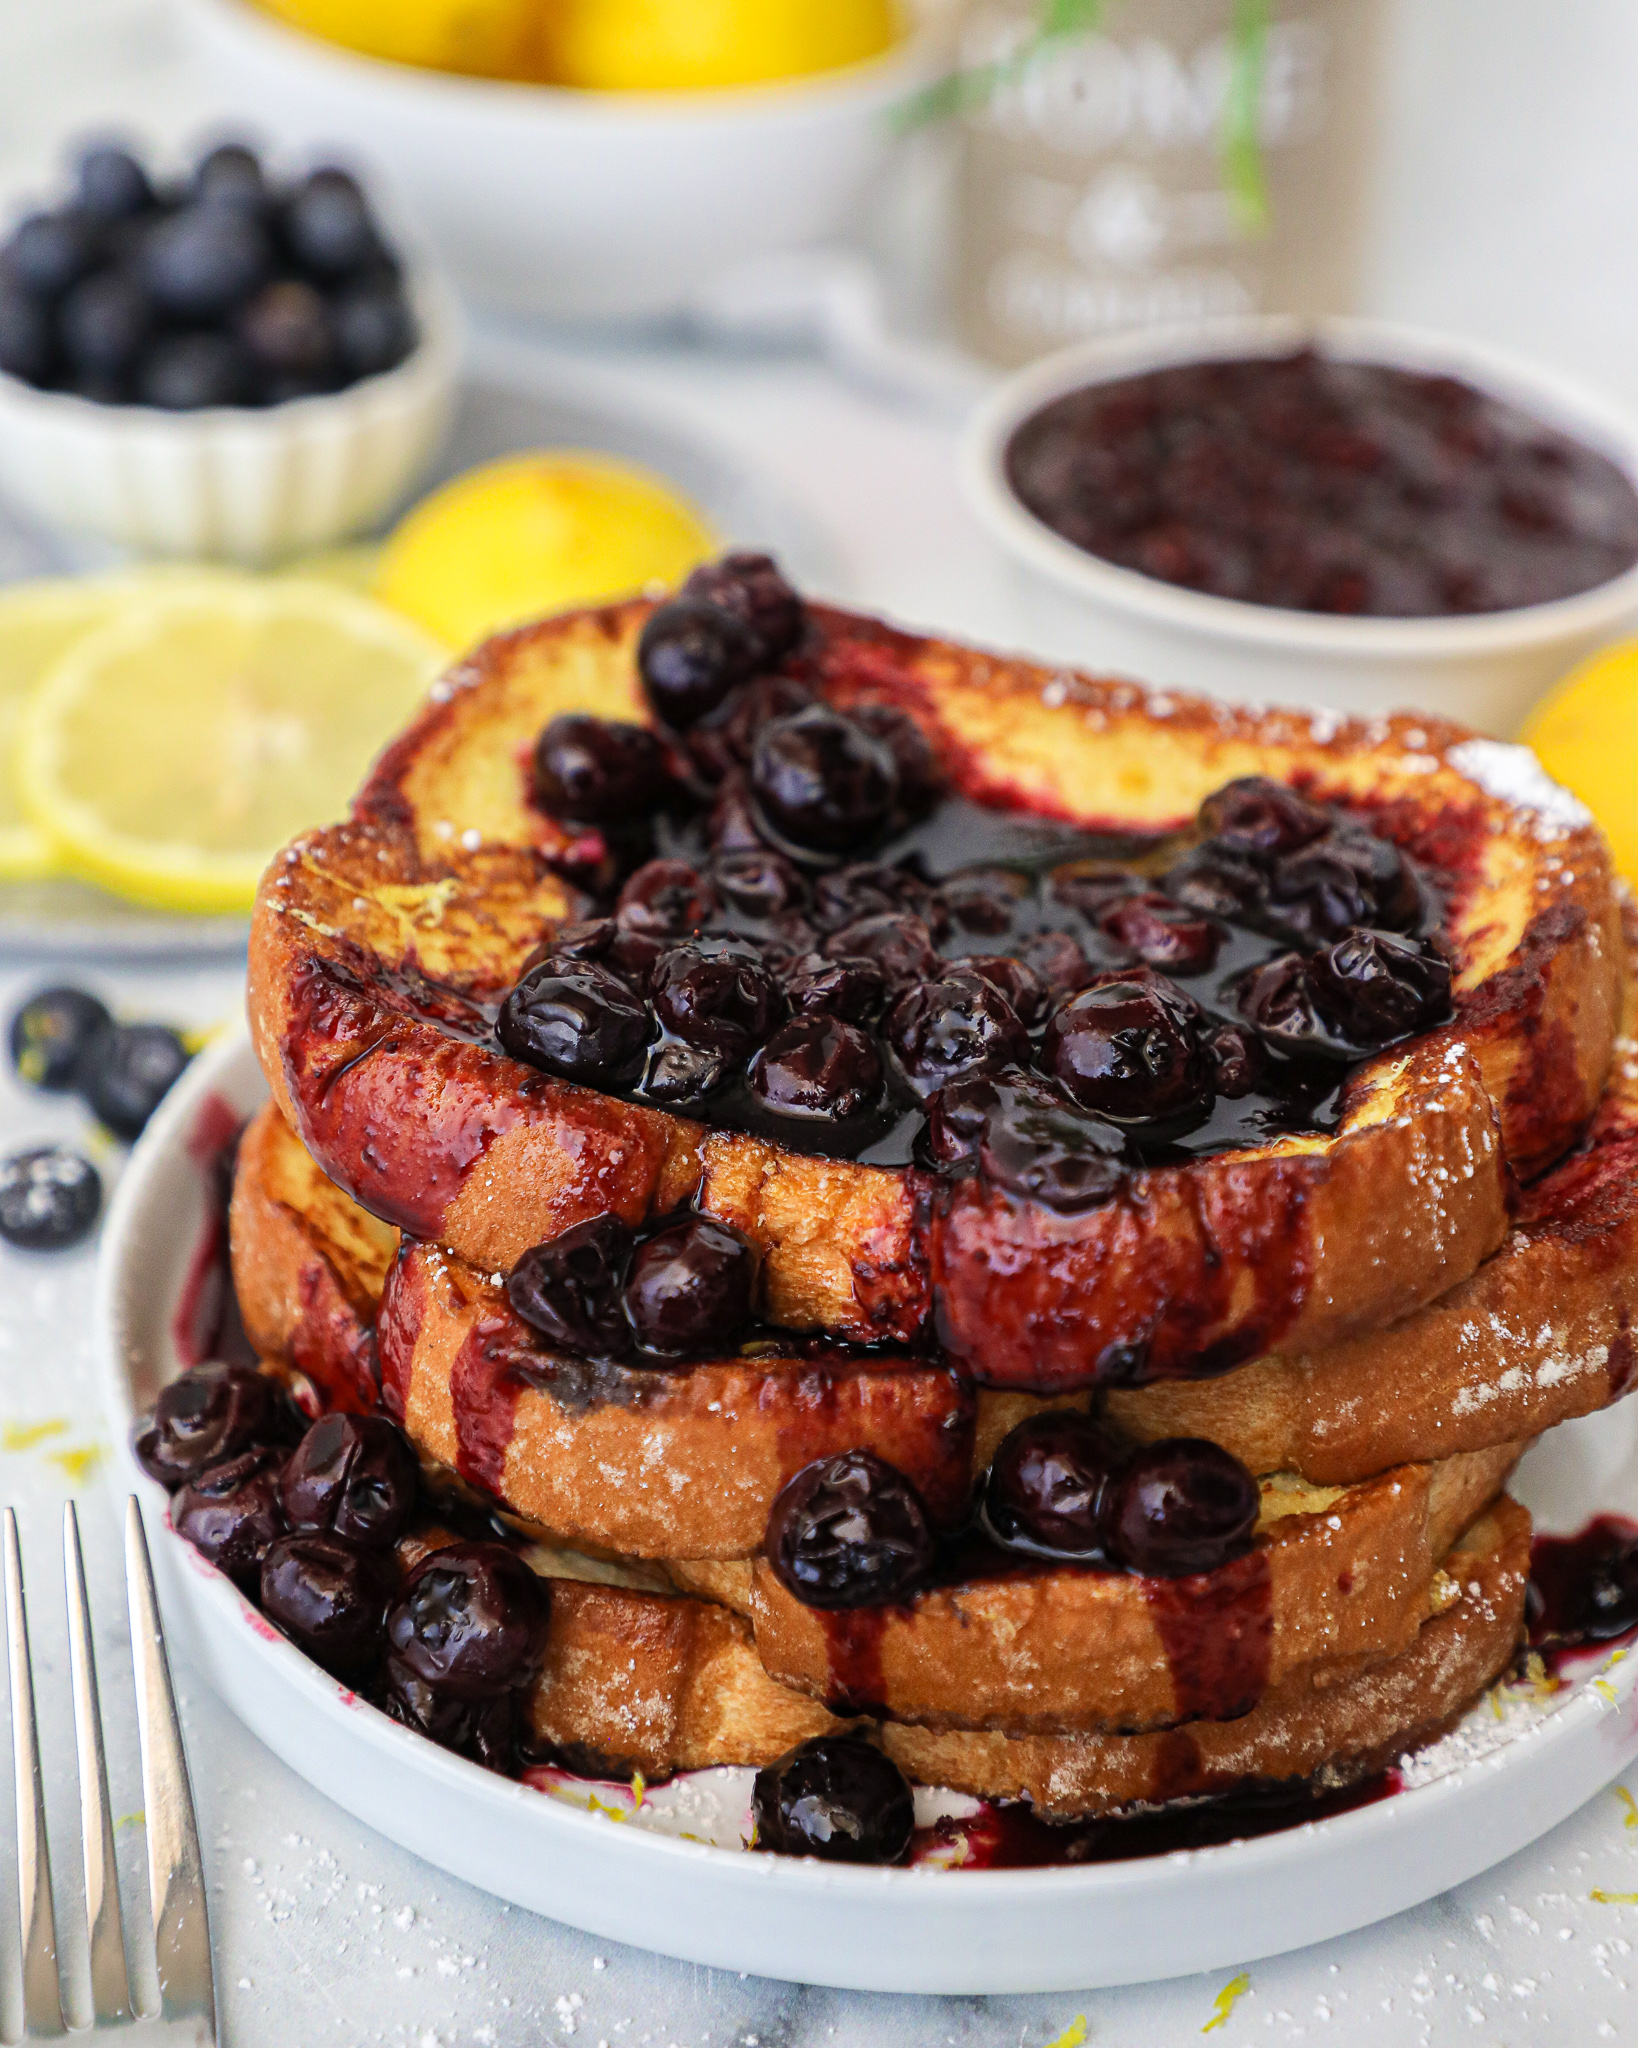 Lemon Basil French Toast: Herb Infused Breakfast Food Served with Lemon Syrup